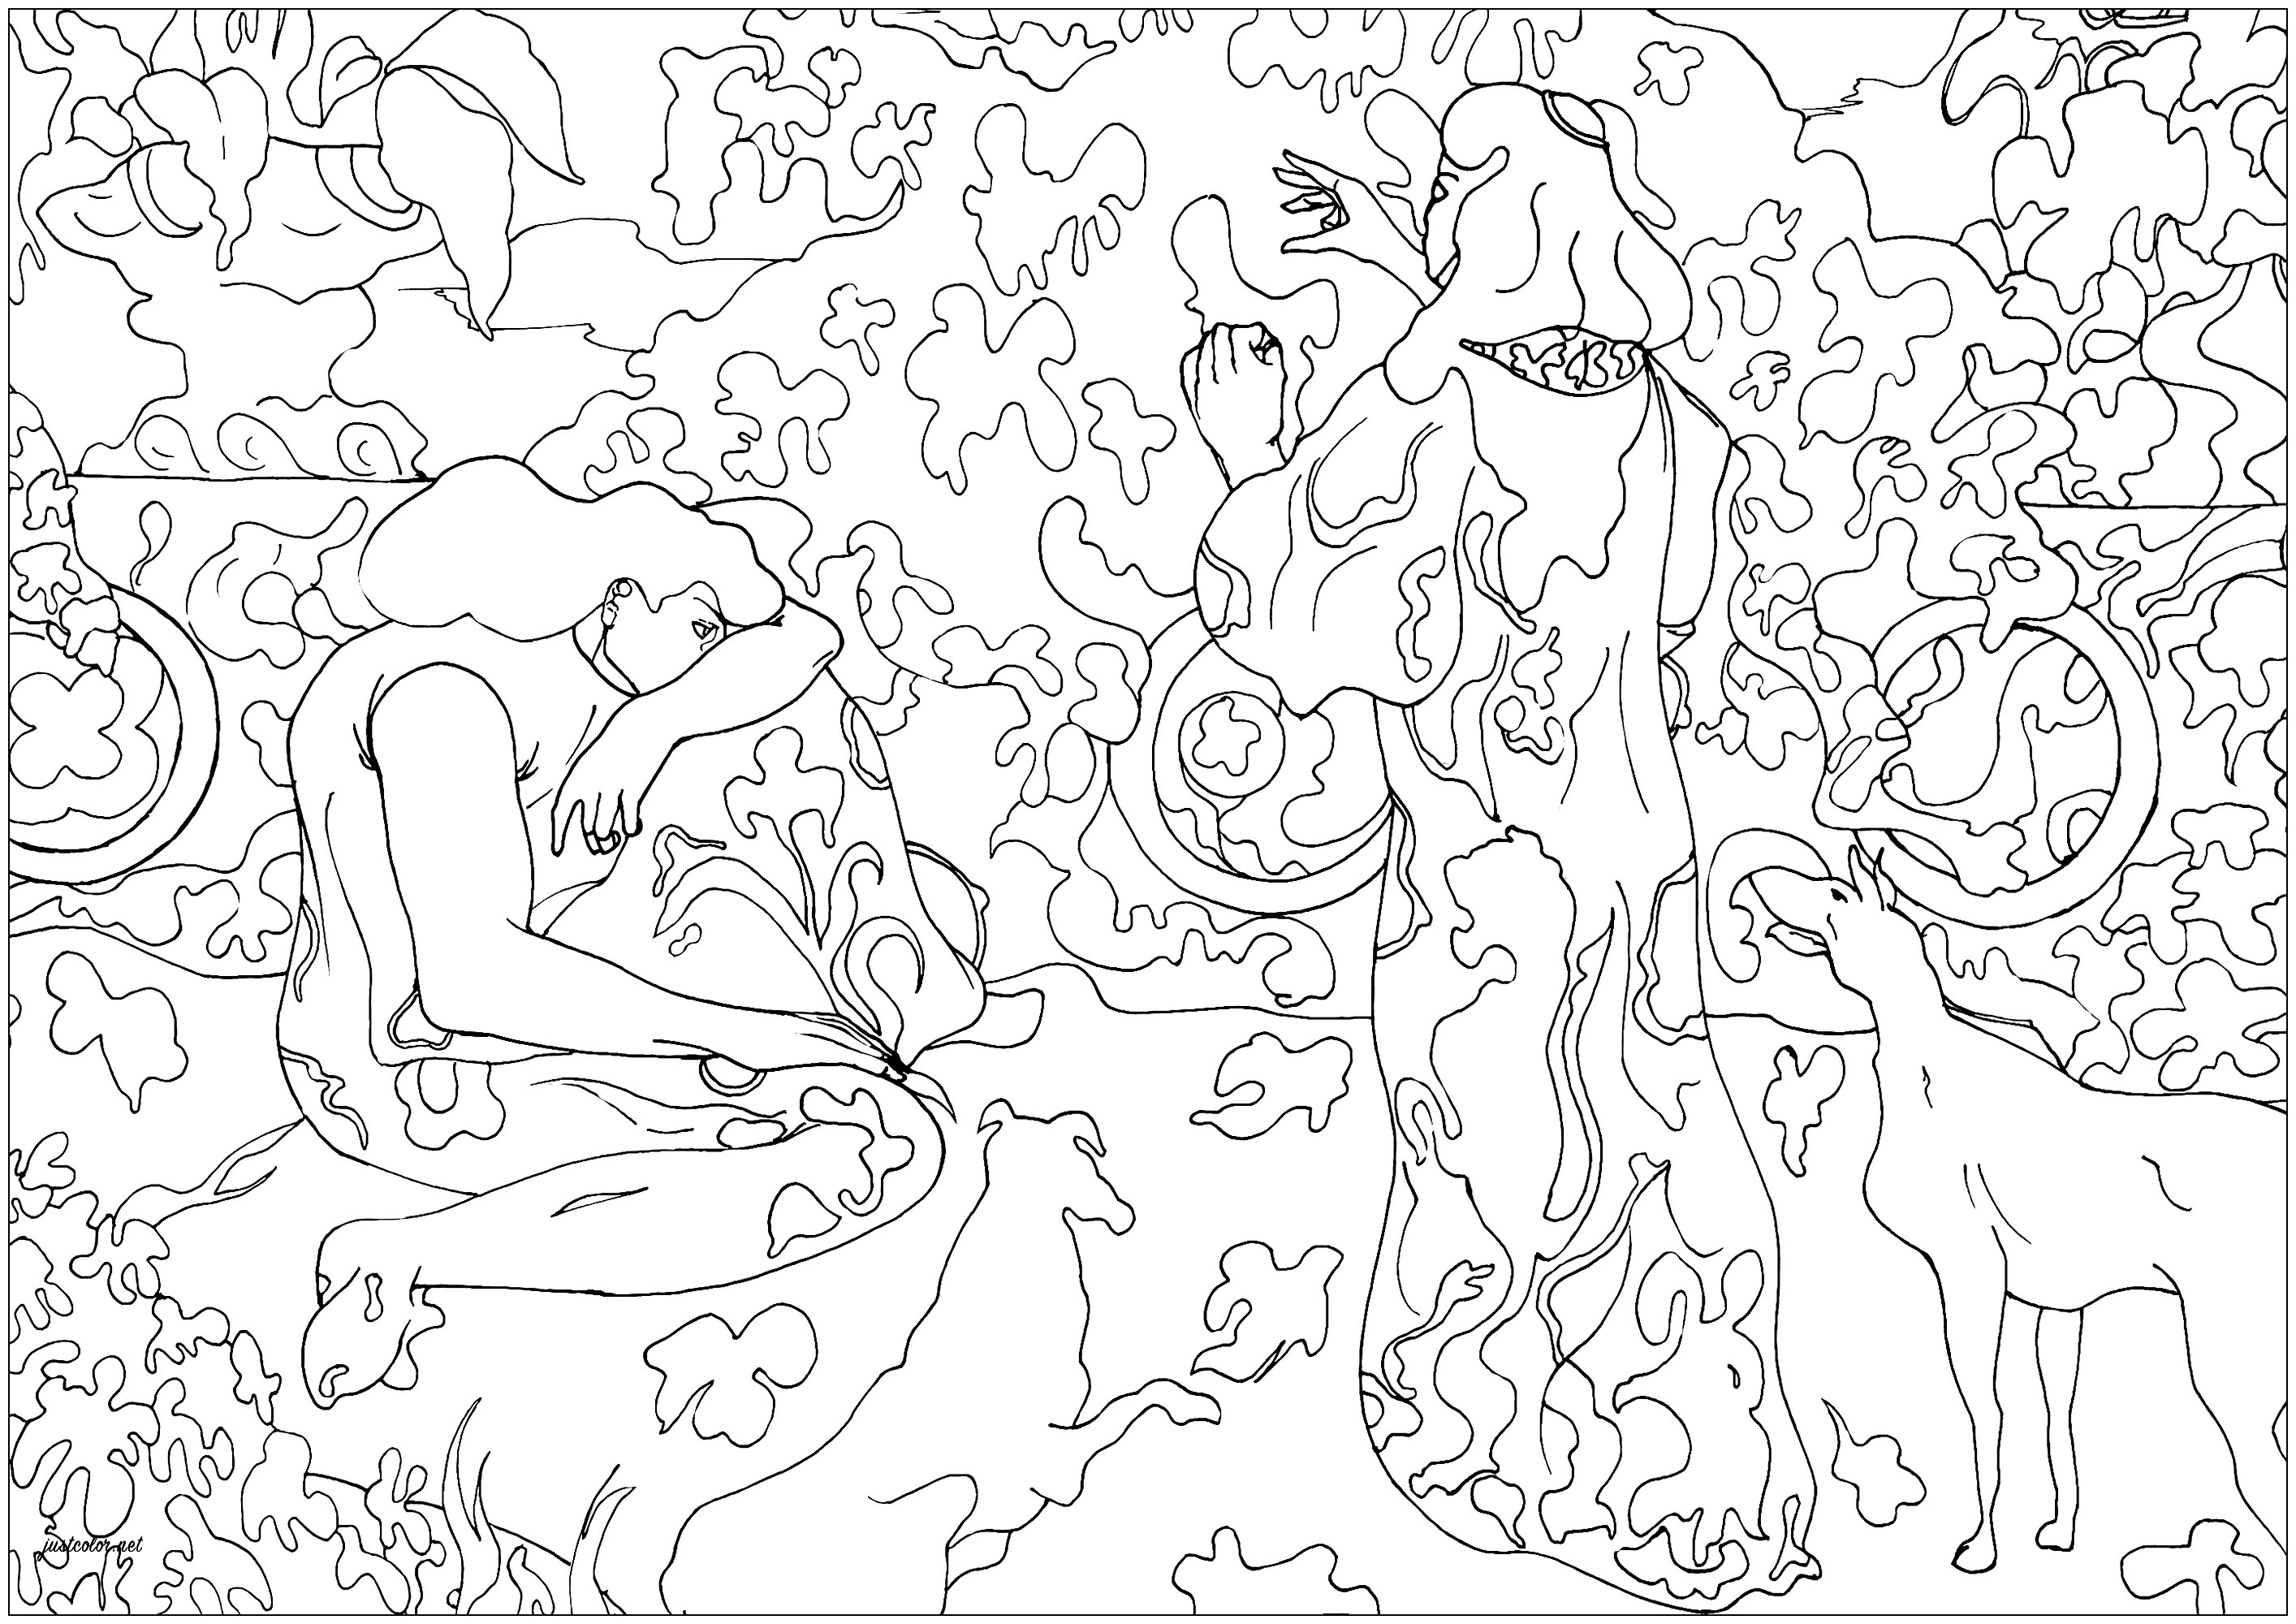 Coloring page created from Paul-Élie Ranson's artwork 'Princesses on the Terrace' (1894). This painting very inspired by Japanese works represents two elegant women and two dogs, on what seems to be the terrace of a rich estate.